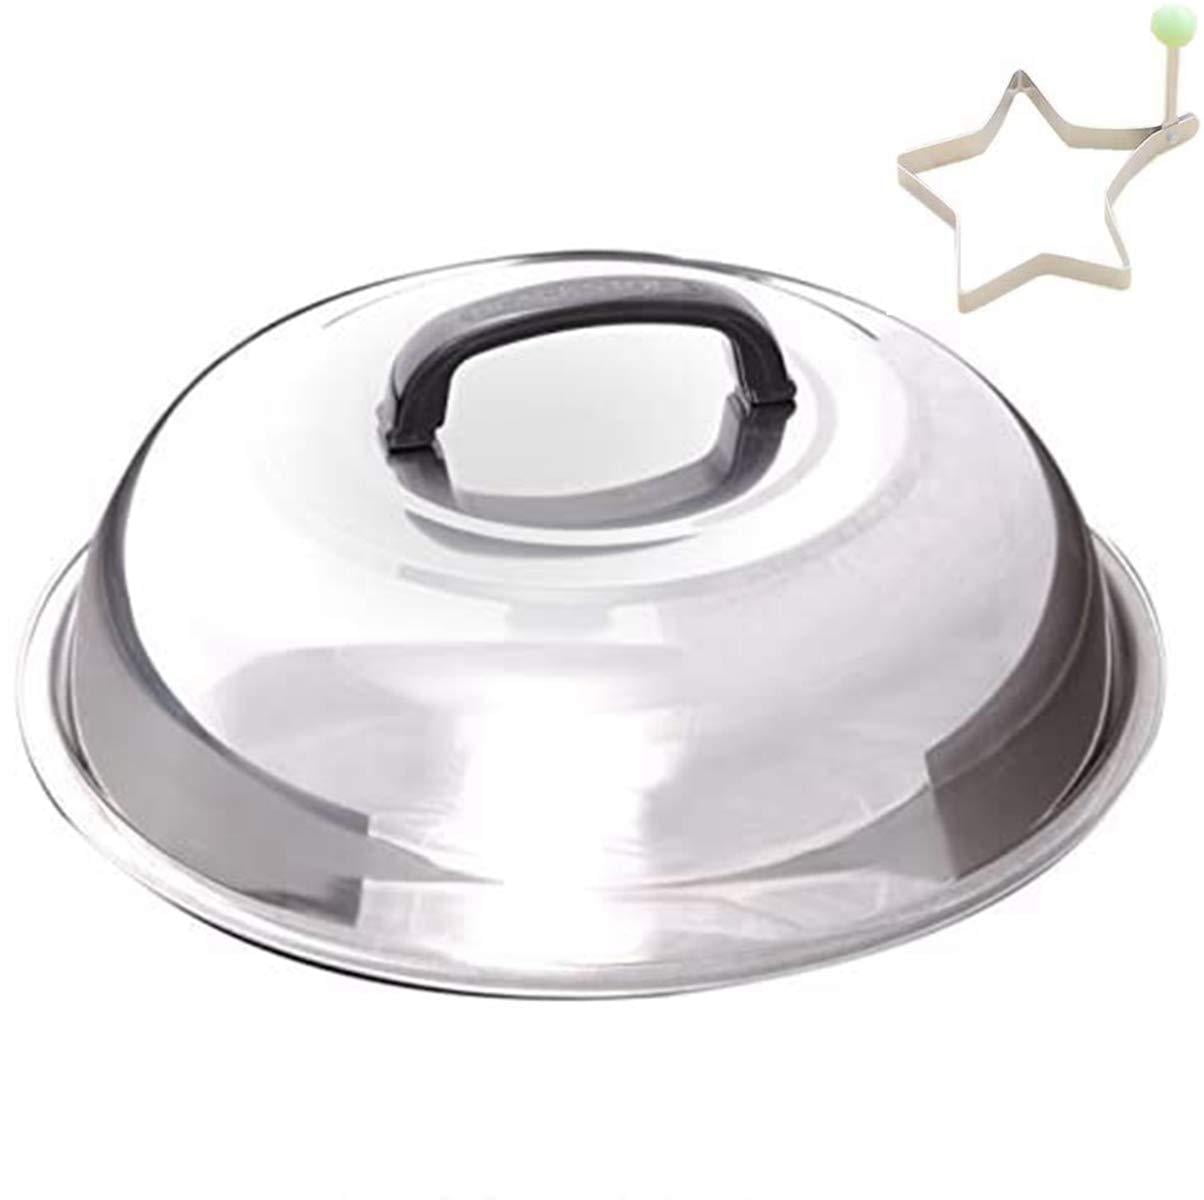 ZHOUWHJJ BBQ Stainless Steel 12" Round Basting Cover/Cheese Melting Dome/Stea... 